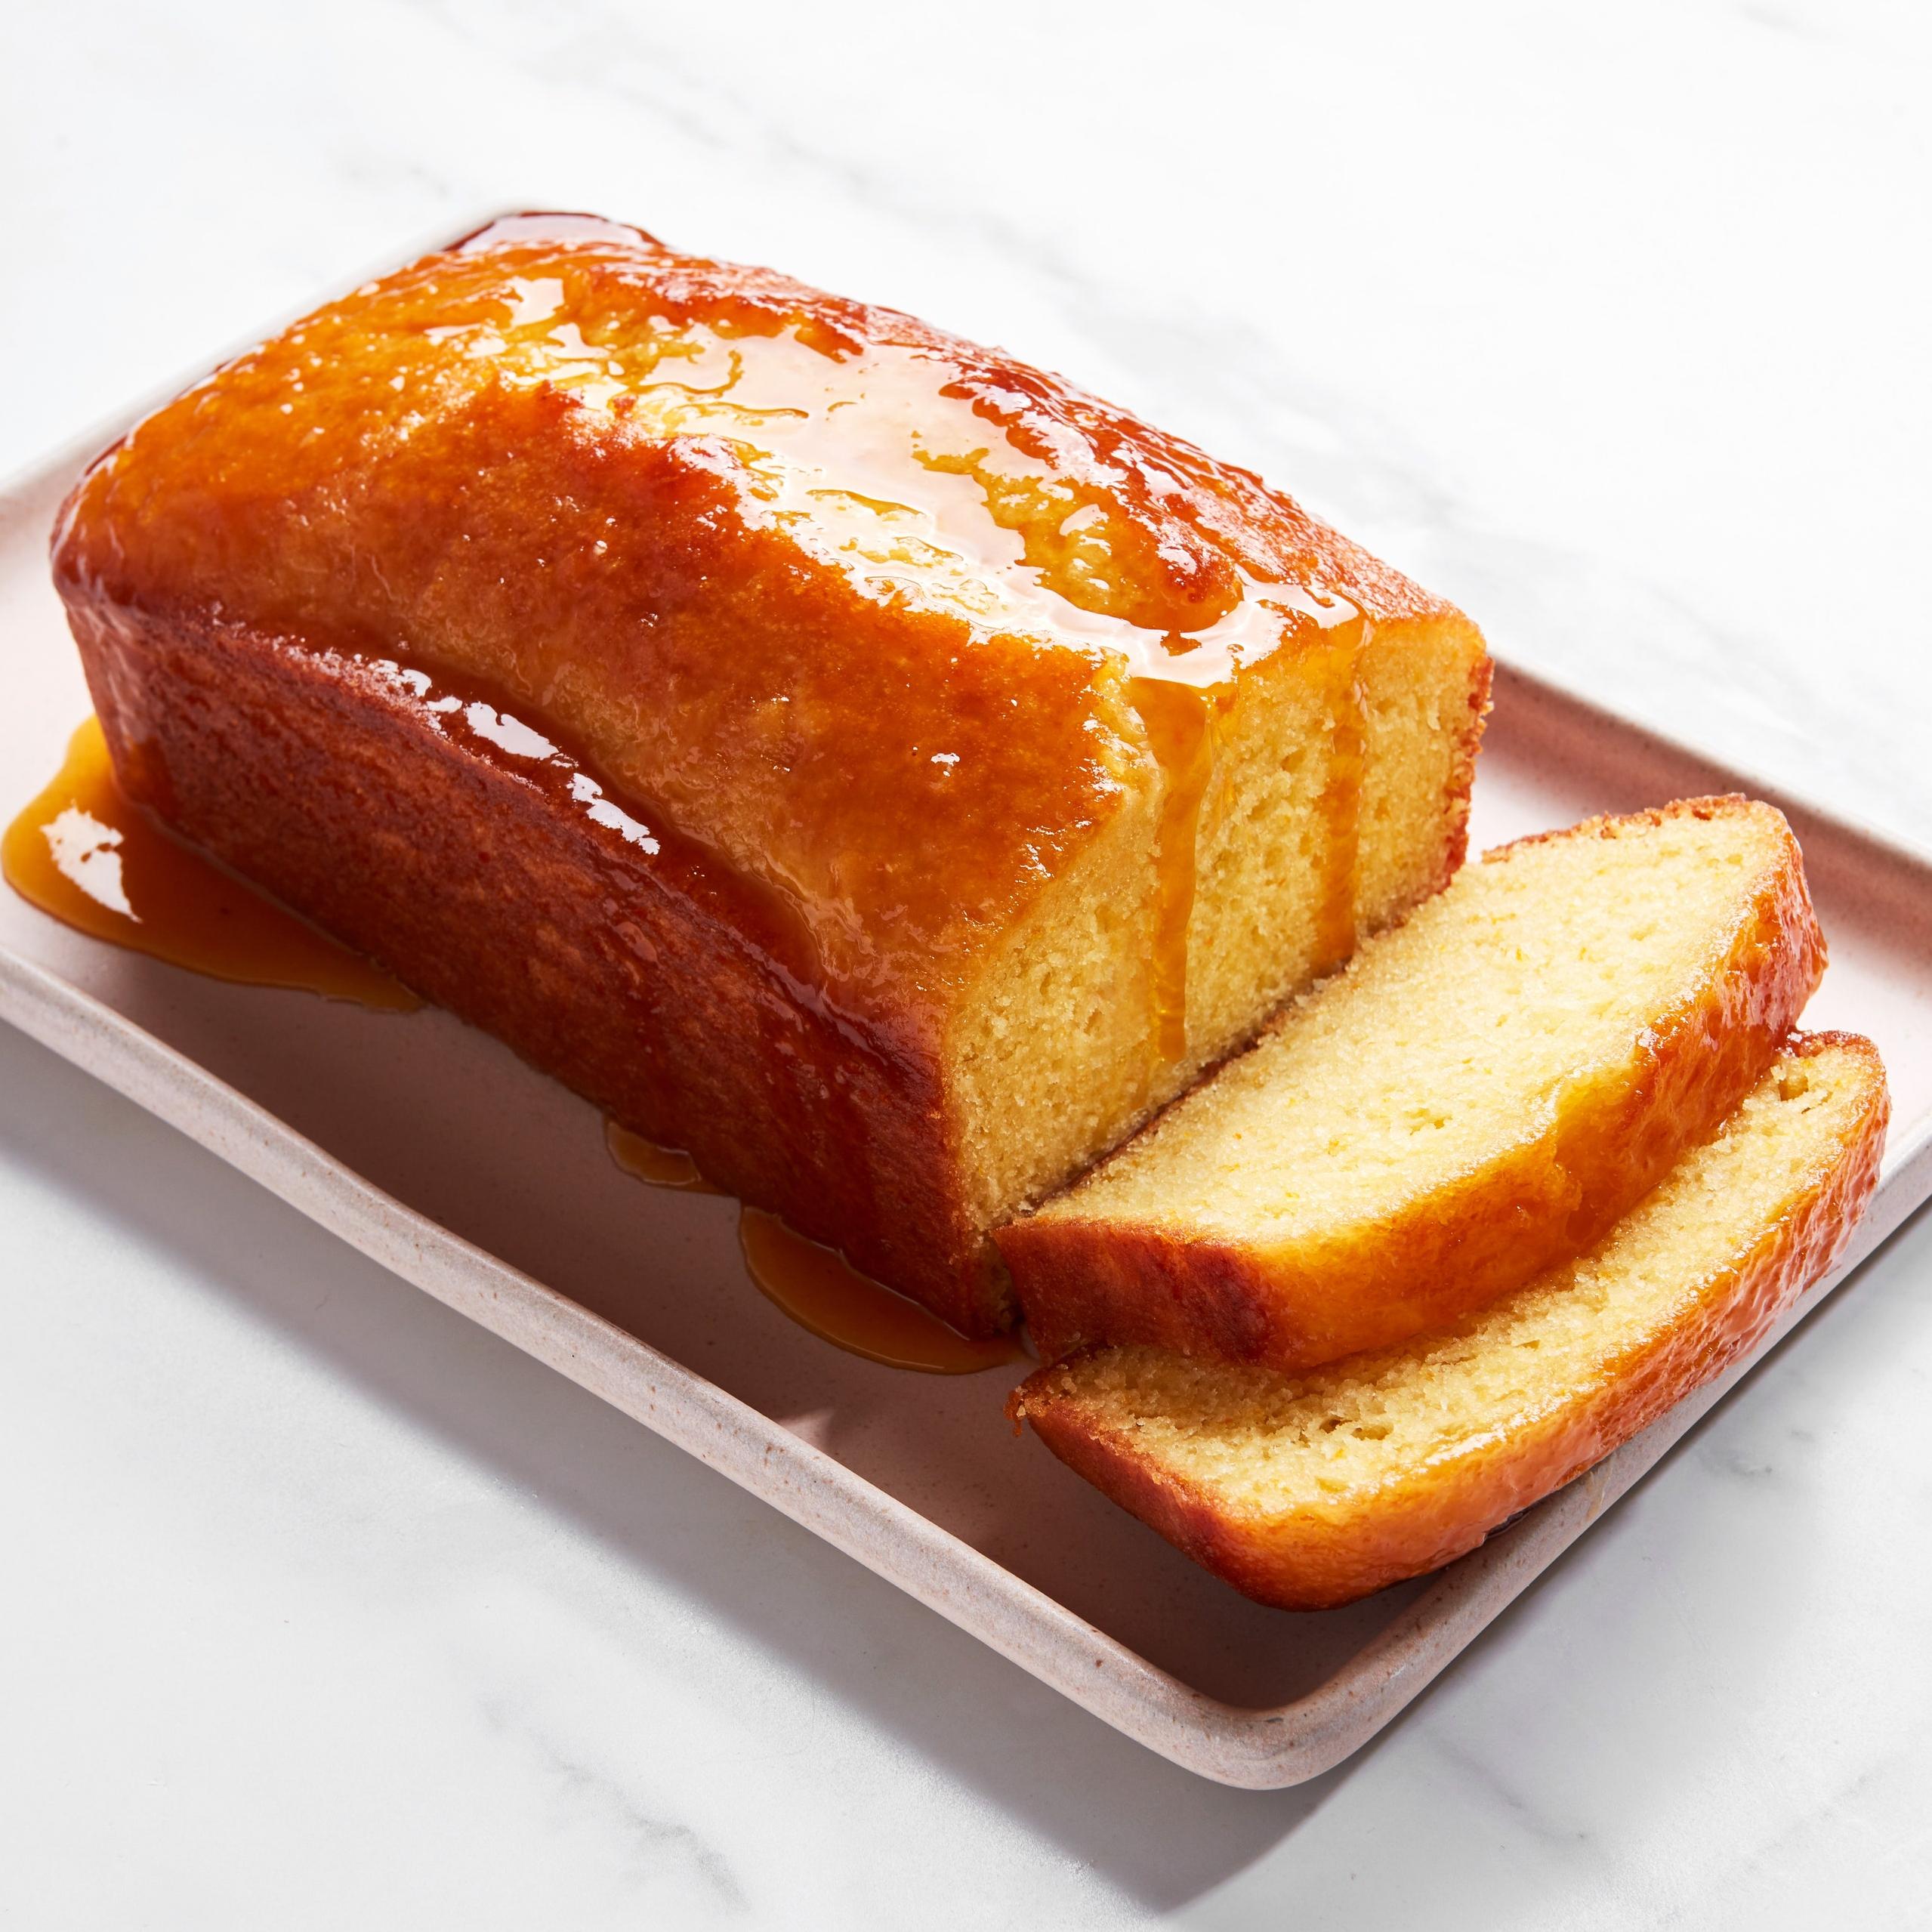  Warm, cozy and full of flavor. This Grand Marnier Pound Cake is perfect for any occasion.